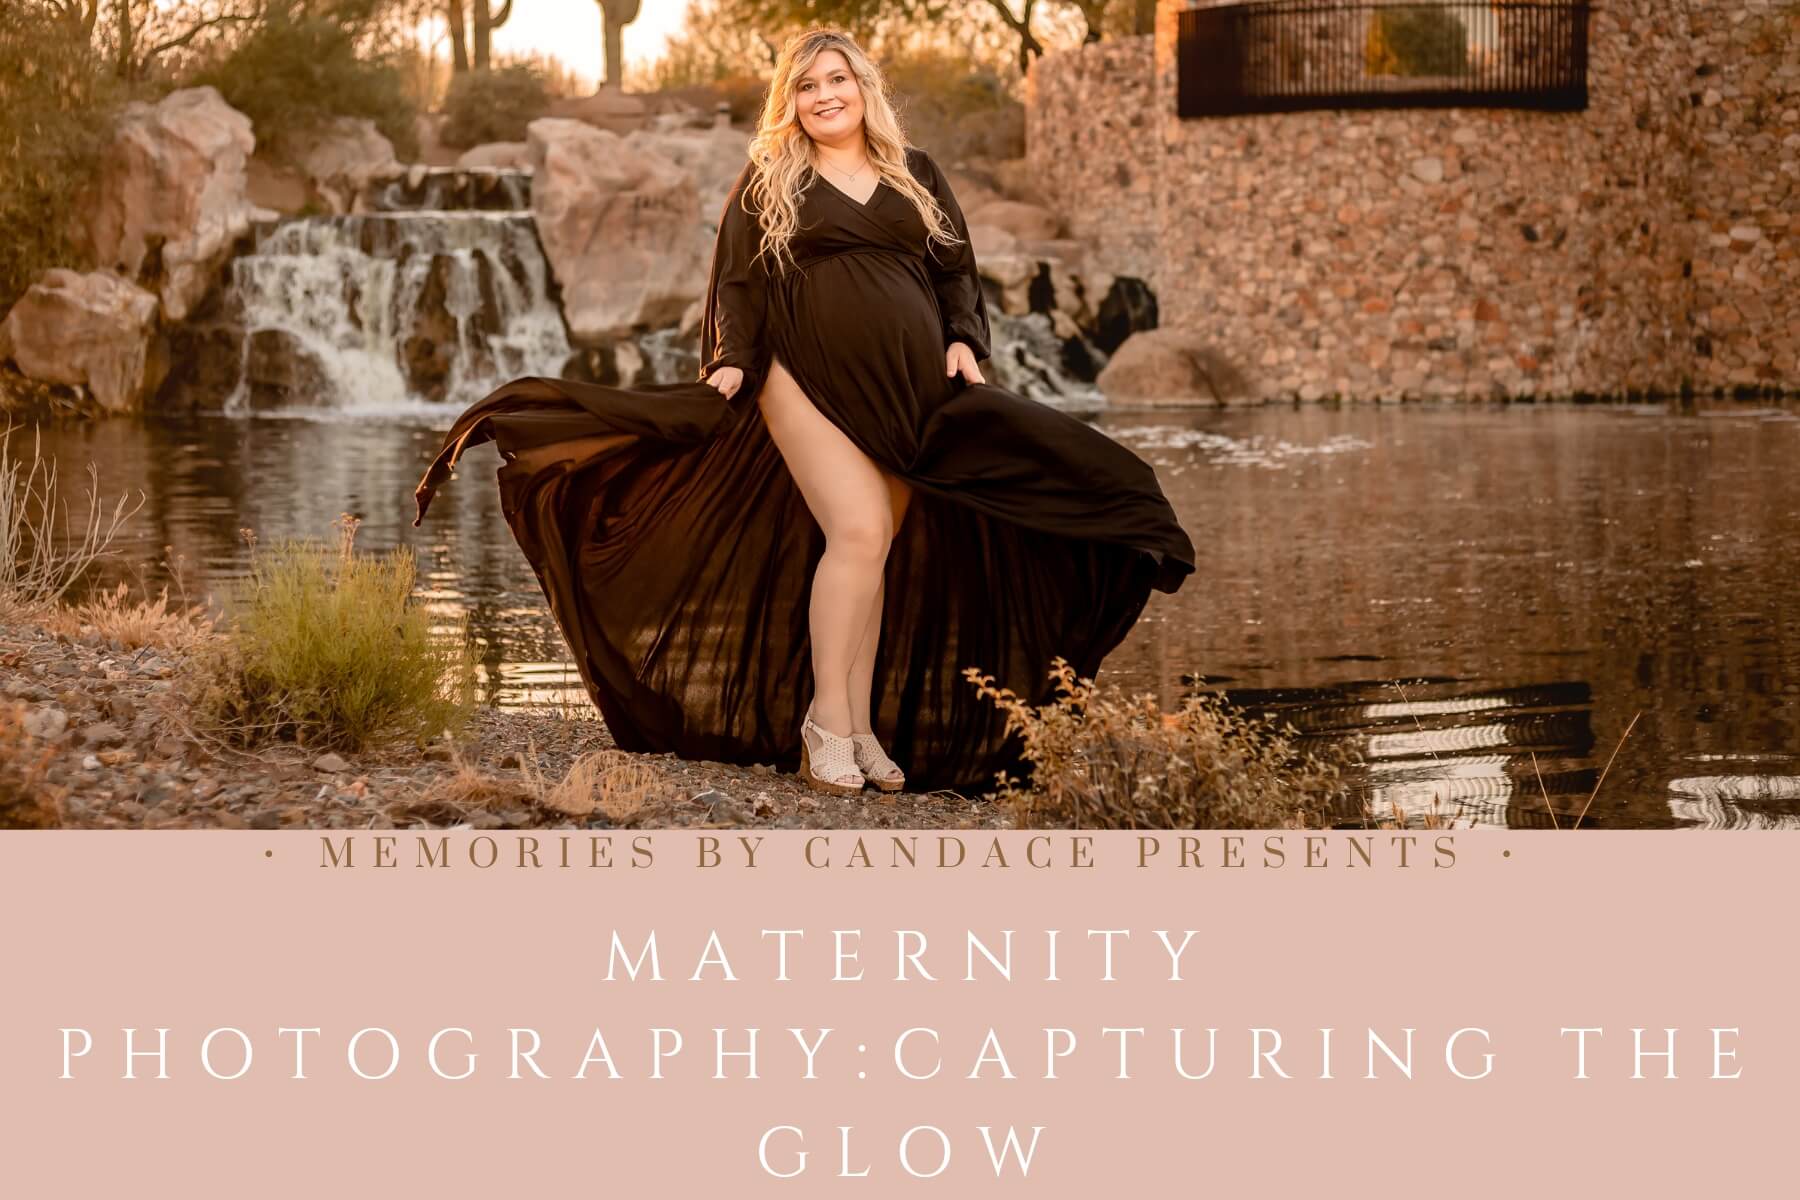 Maternity Photography and Capturing the Glow